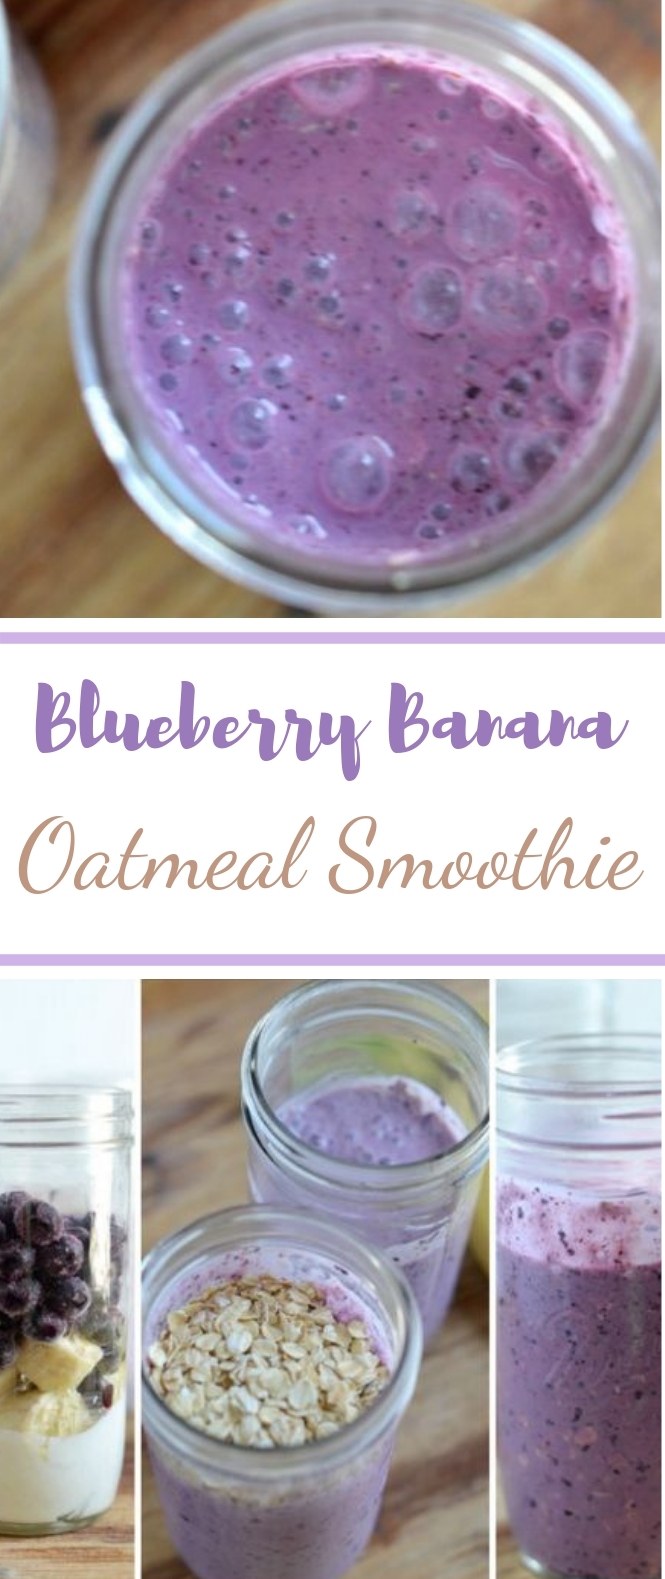 Blueberry Banana Oatmeal Smoothie #smoothie #healthydrink